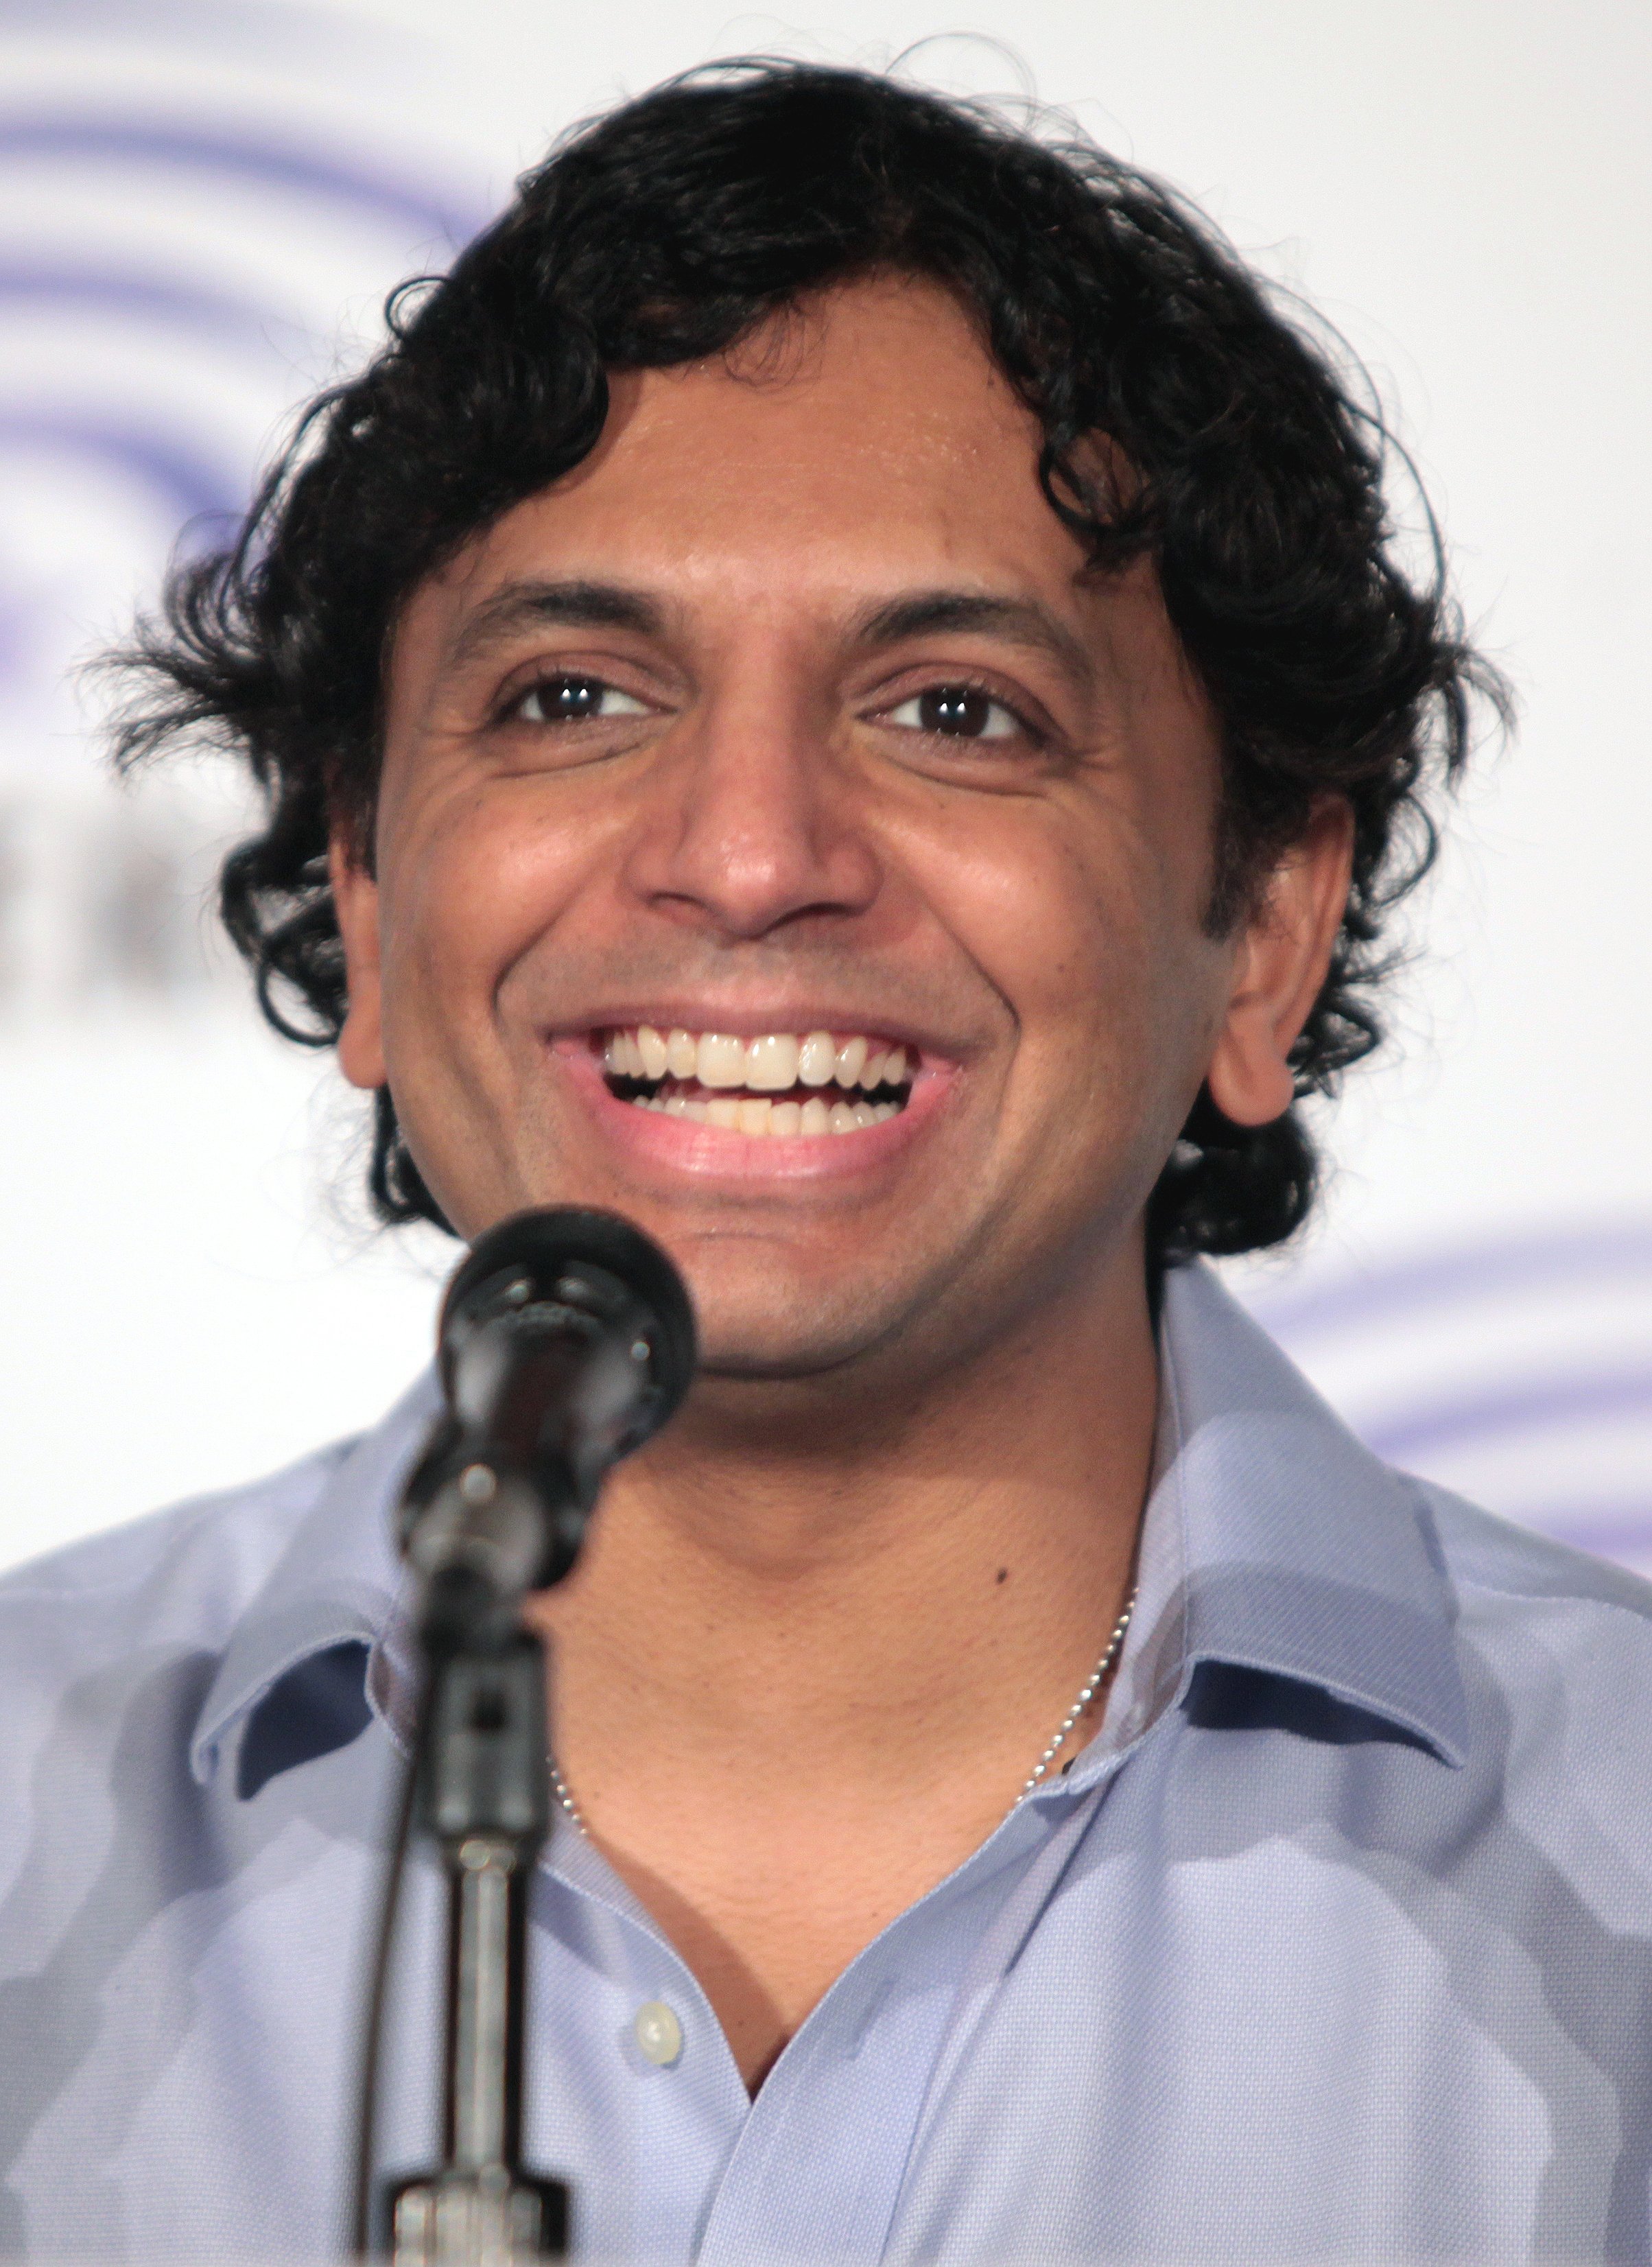 M. Night Shyamalan speaking at the 2016 WonderCon in Los Angeles, California. | Getty Images